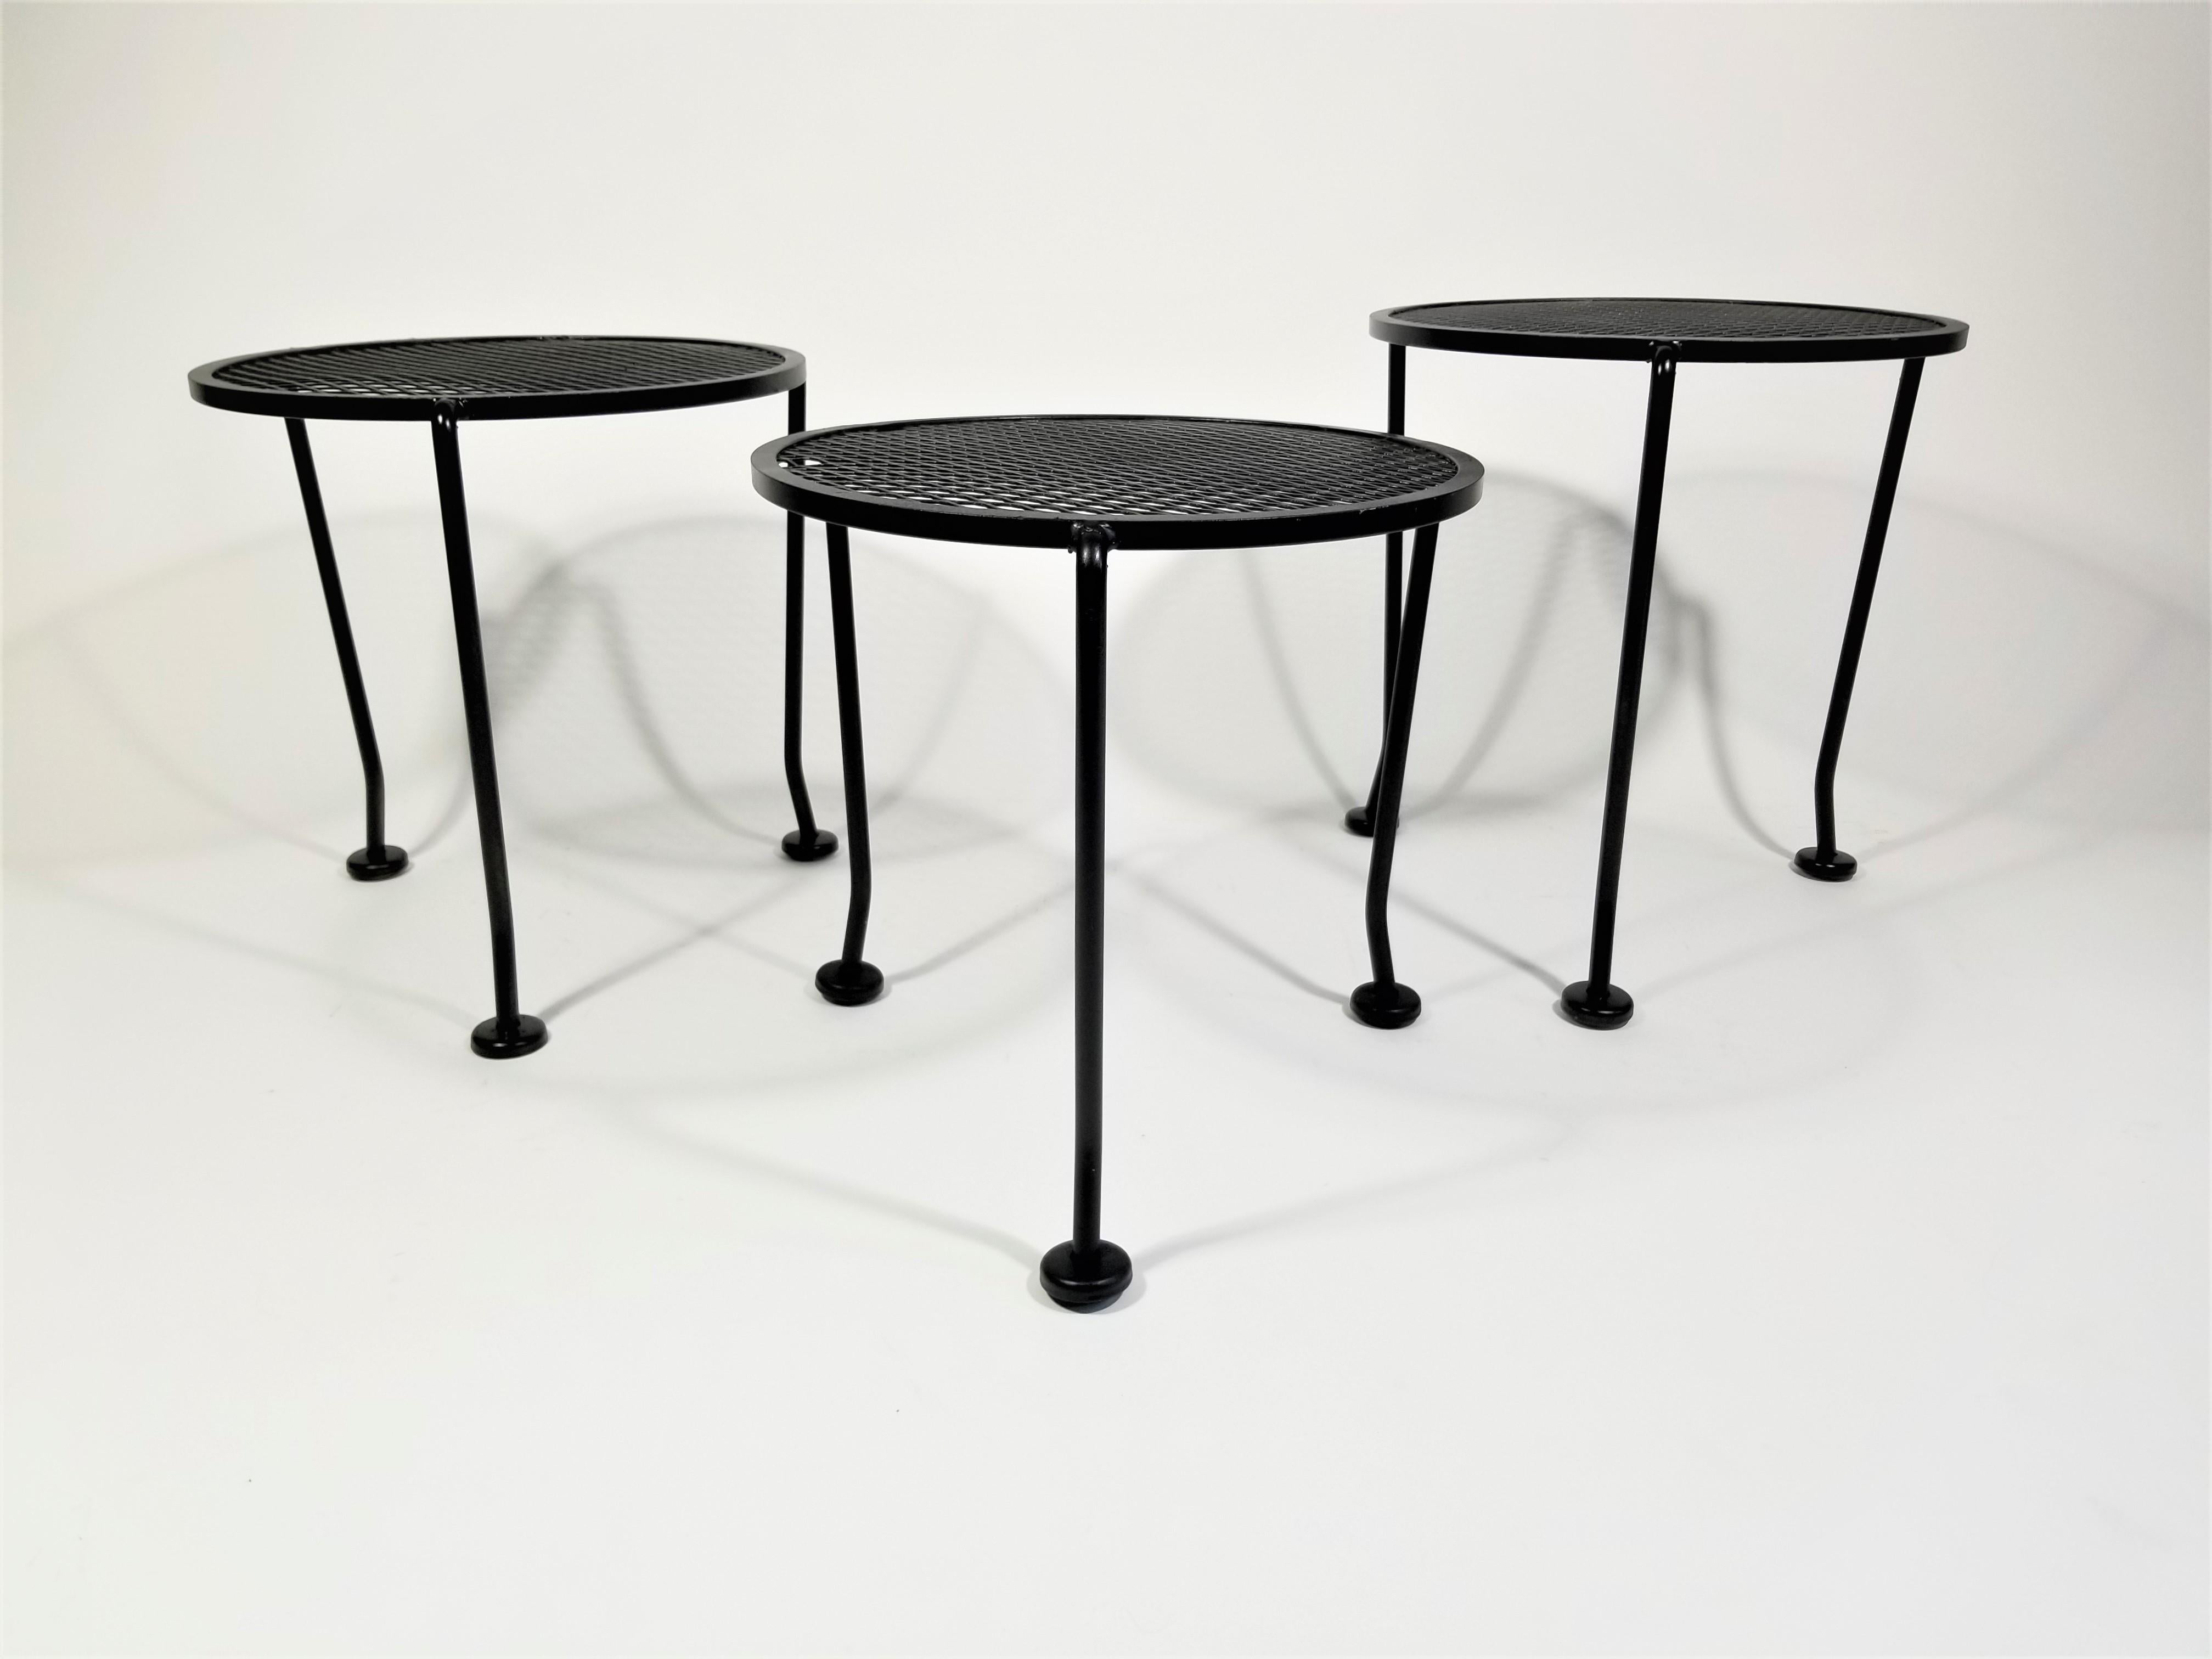 Set of 3 midcentury Salterini wrought iron nesting or stacking tables. Black finish. Outdoor garden patio tables. Perfect for a small space.
Measurements of Each Stool:
Largest Table Height - 16.25 inches, Top Diameter - 14.5 inches, 
Bottom